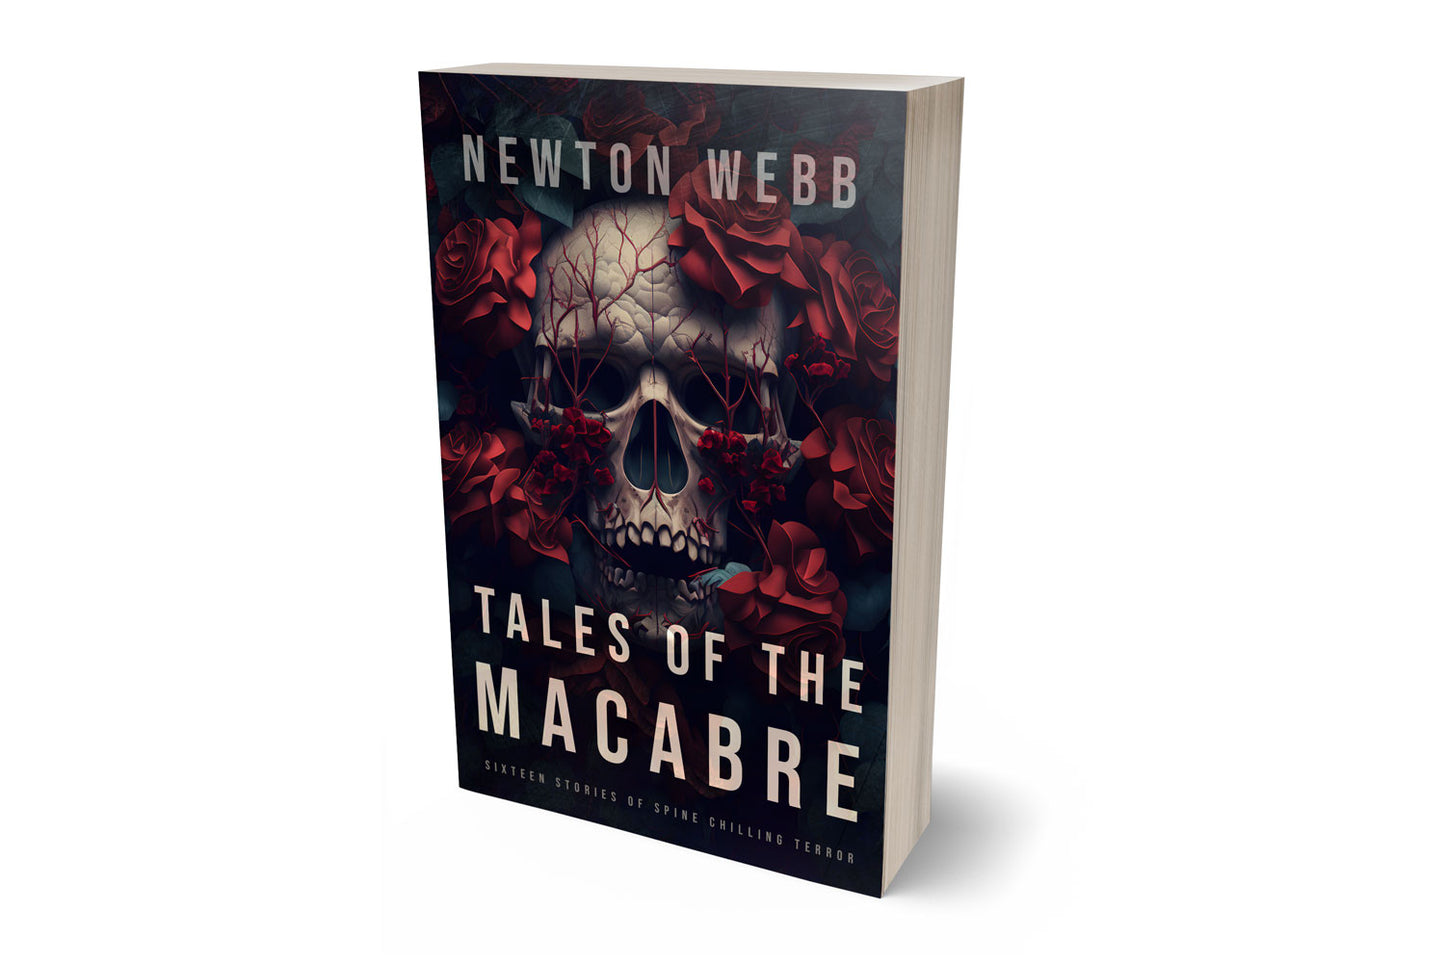 Tales of the Macabre (Books 1 & 2) | Paperback Bundle